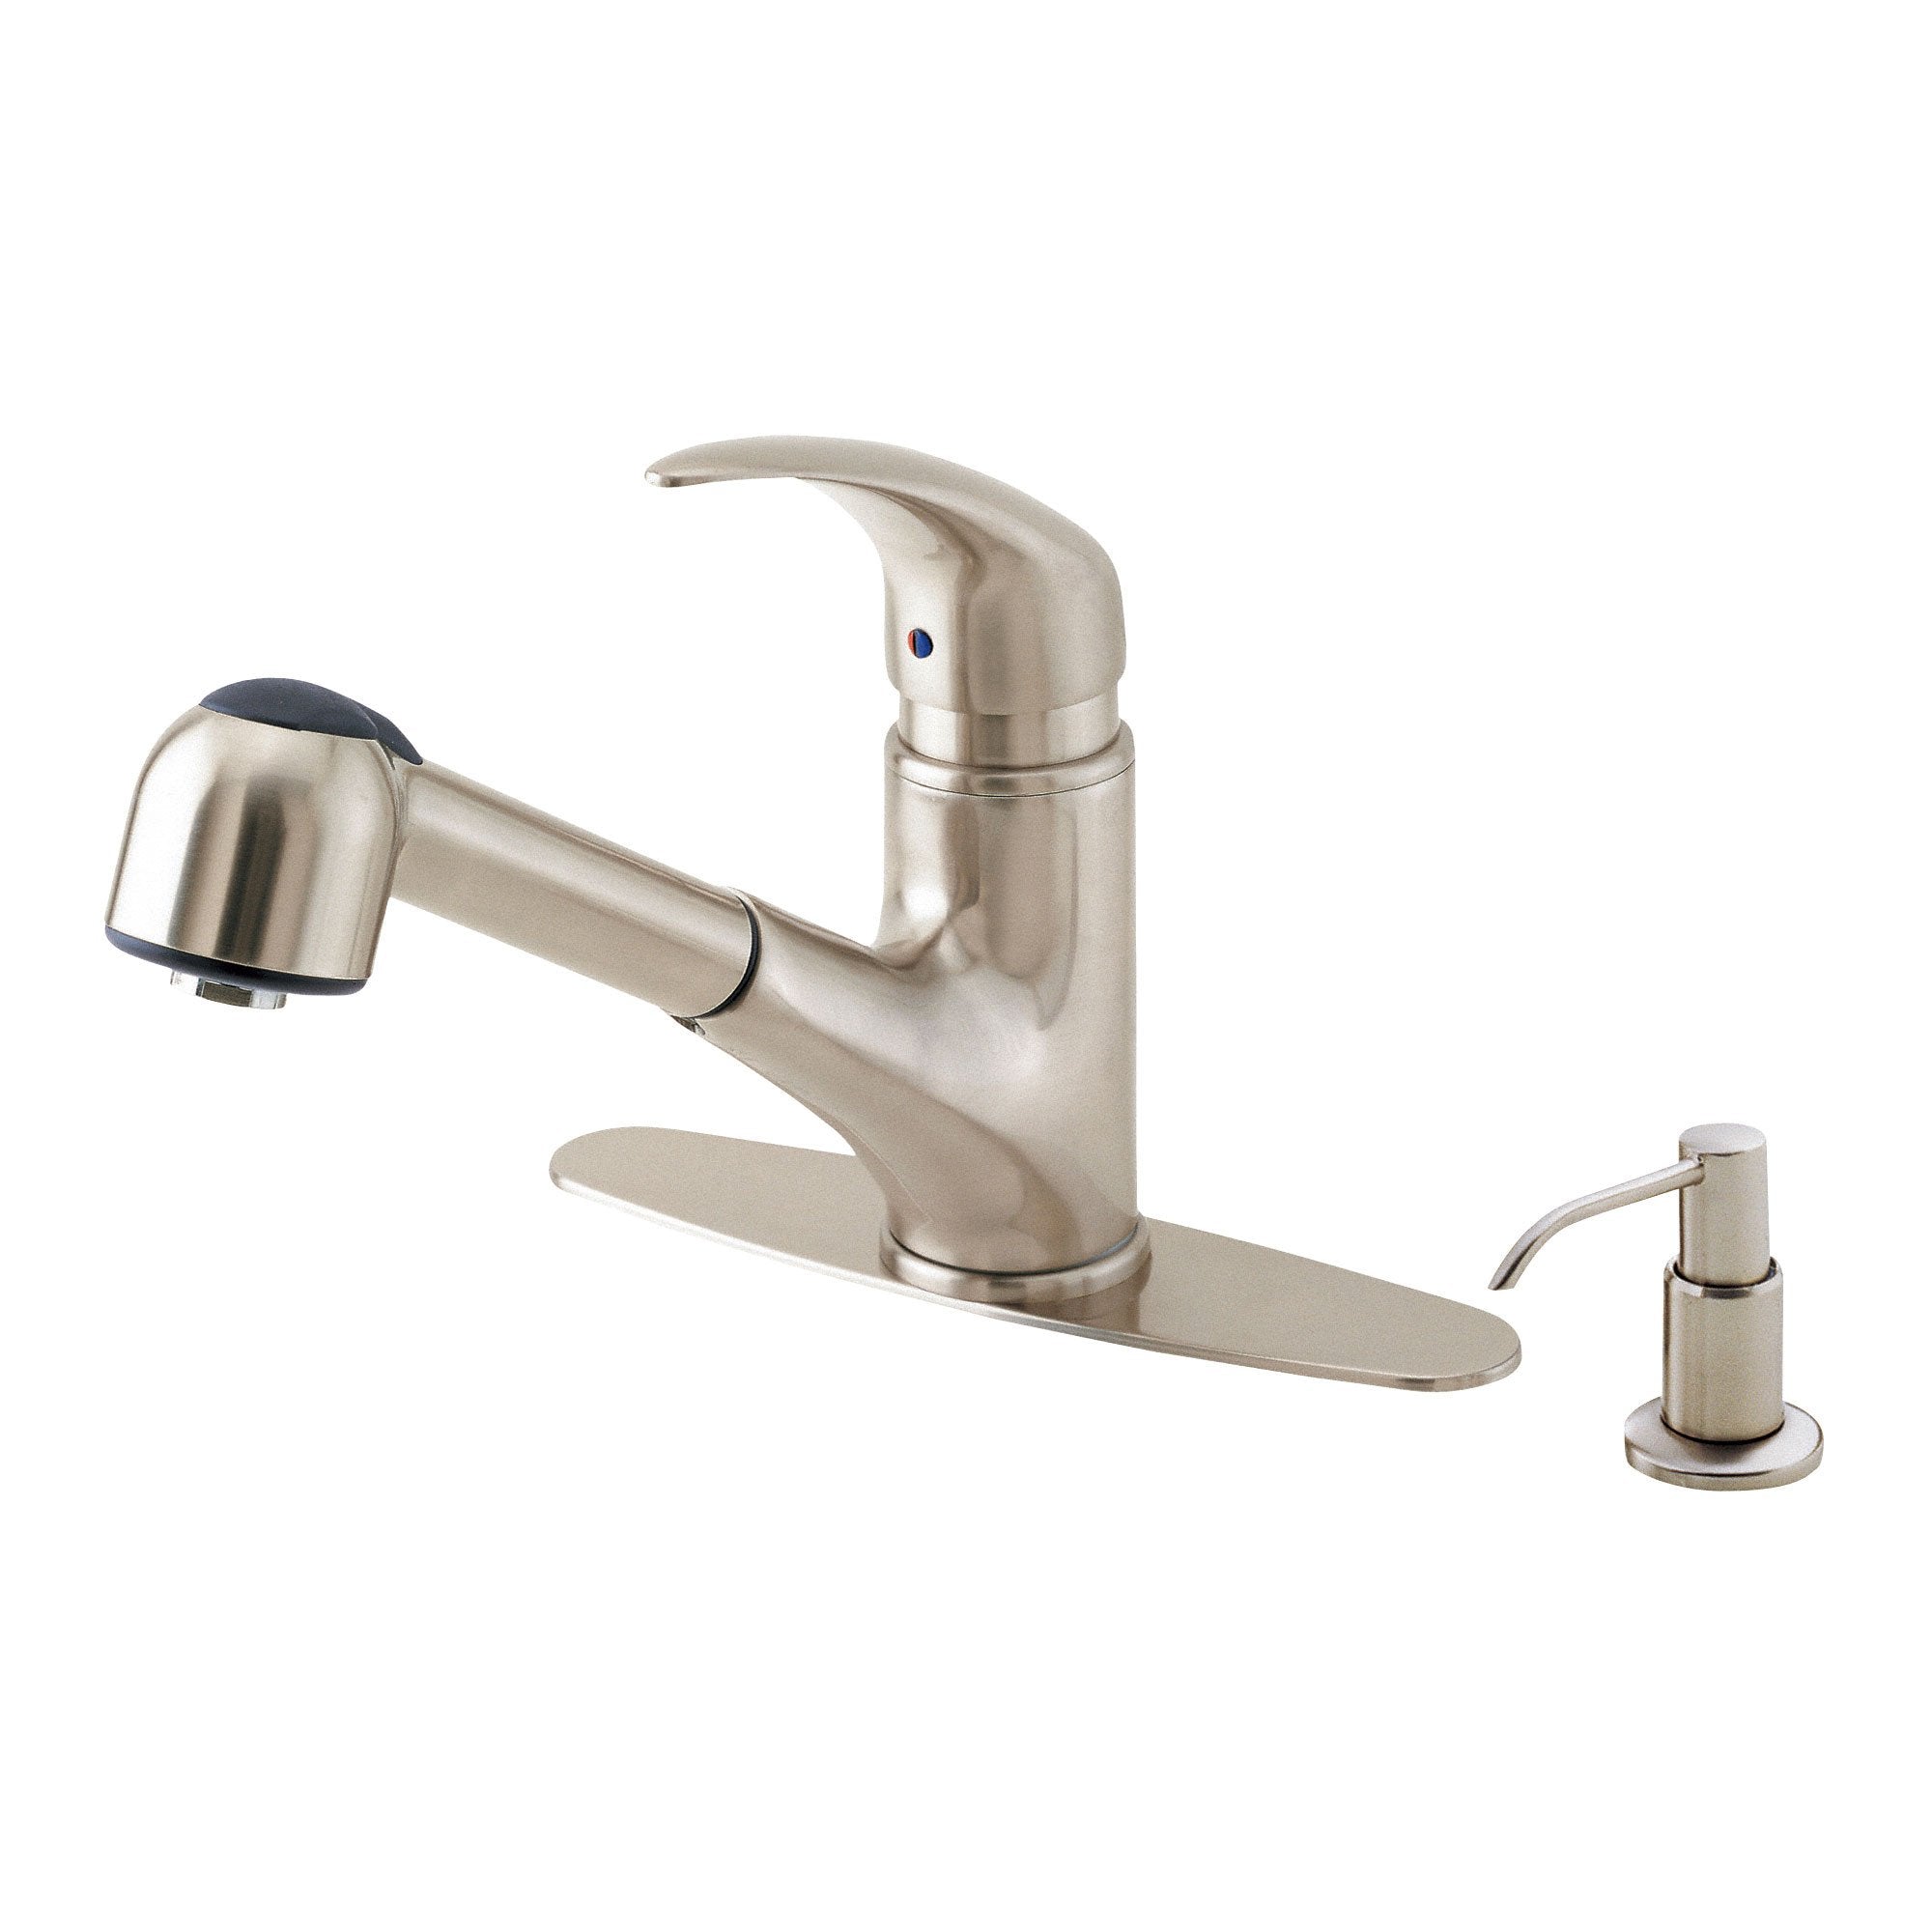 Danze Melrose Modern Stainless Steel Single Handle Pull-Down Kitchen Faucet